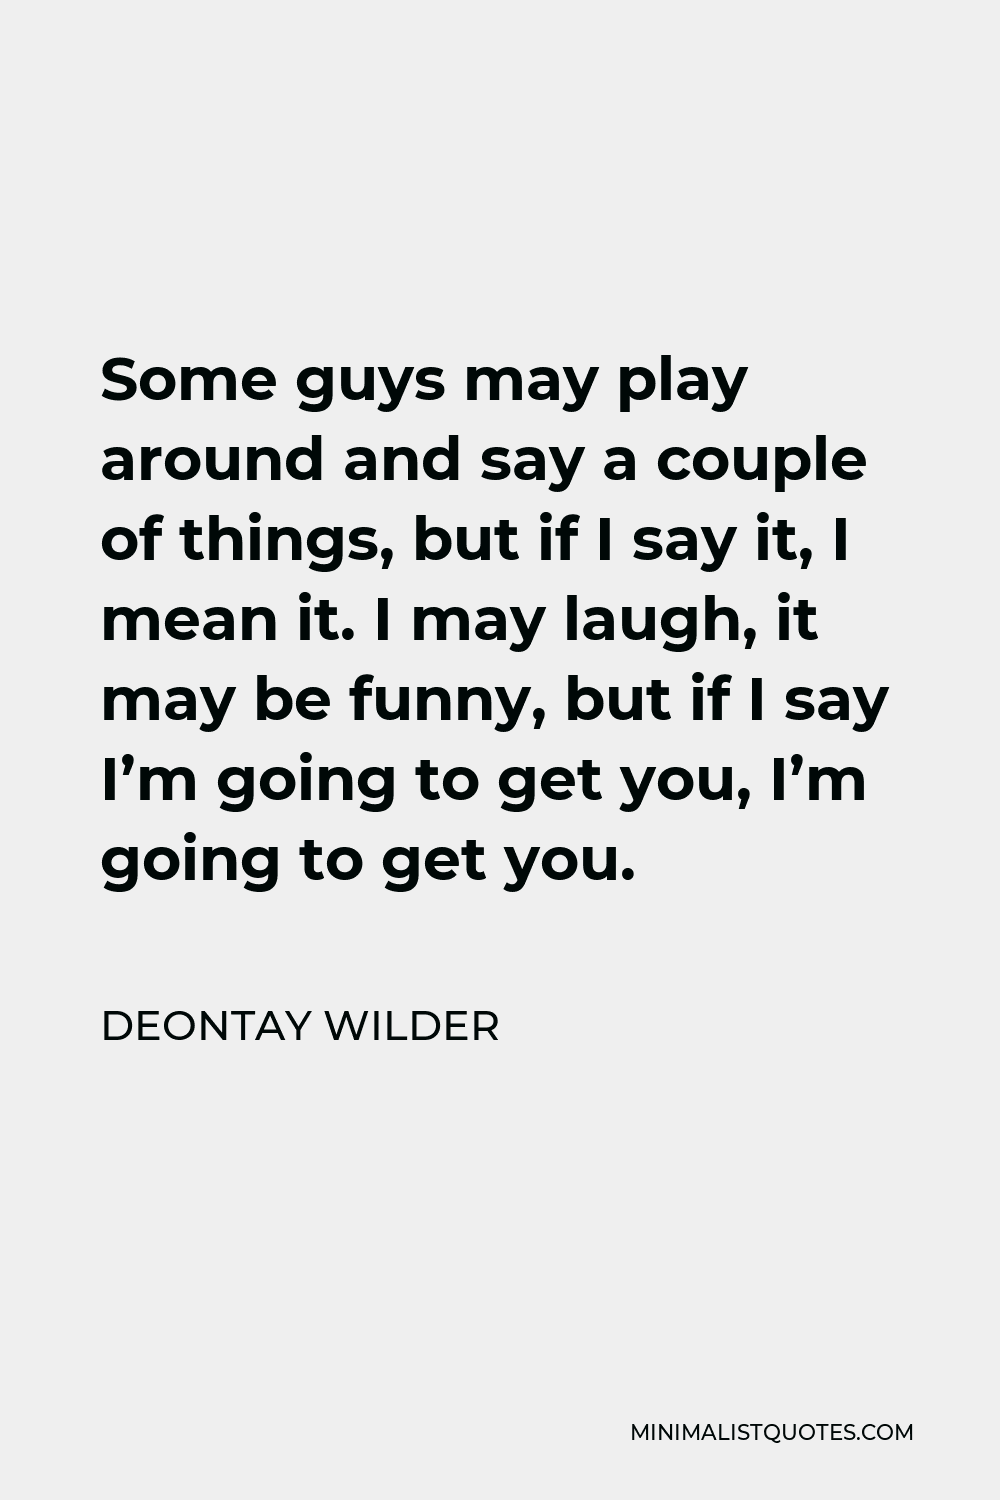 Deontay Wilder Quote - Some guys may play around and say a couple of things, but if I say it, I mean it. I may laugh, it may be funny, but if I say I’m going to get you, I’m going to get you.